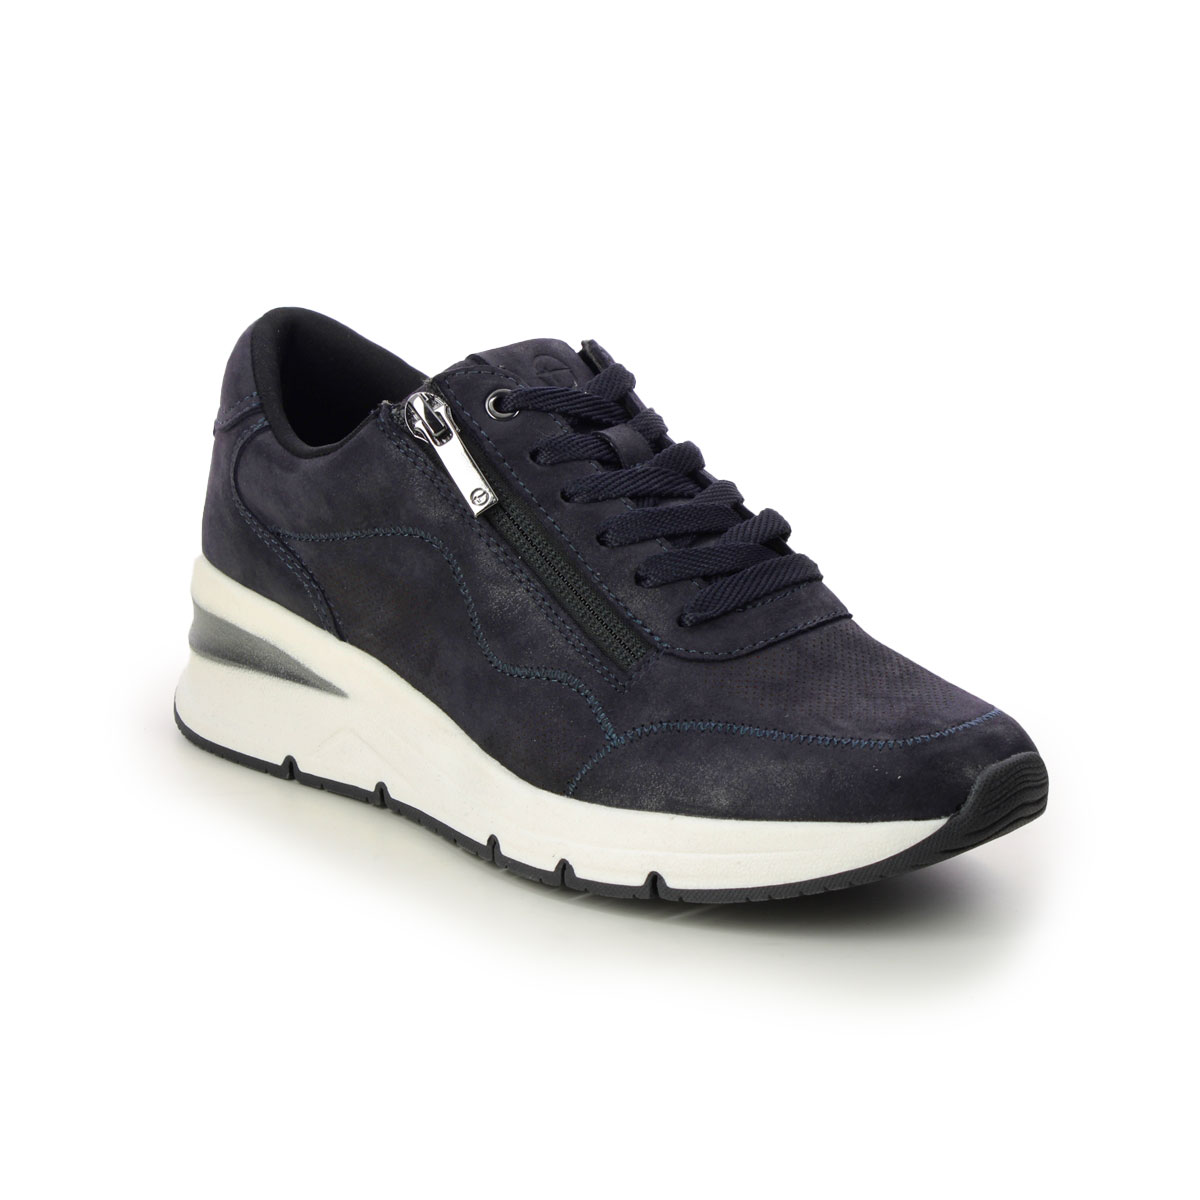 Tamaris Rea Zip Wedge Navy Nubuck Womens trainers 23761-42-805 in a Plain Leather in Size 39